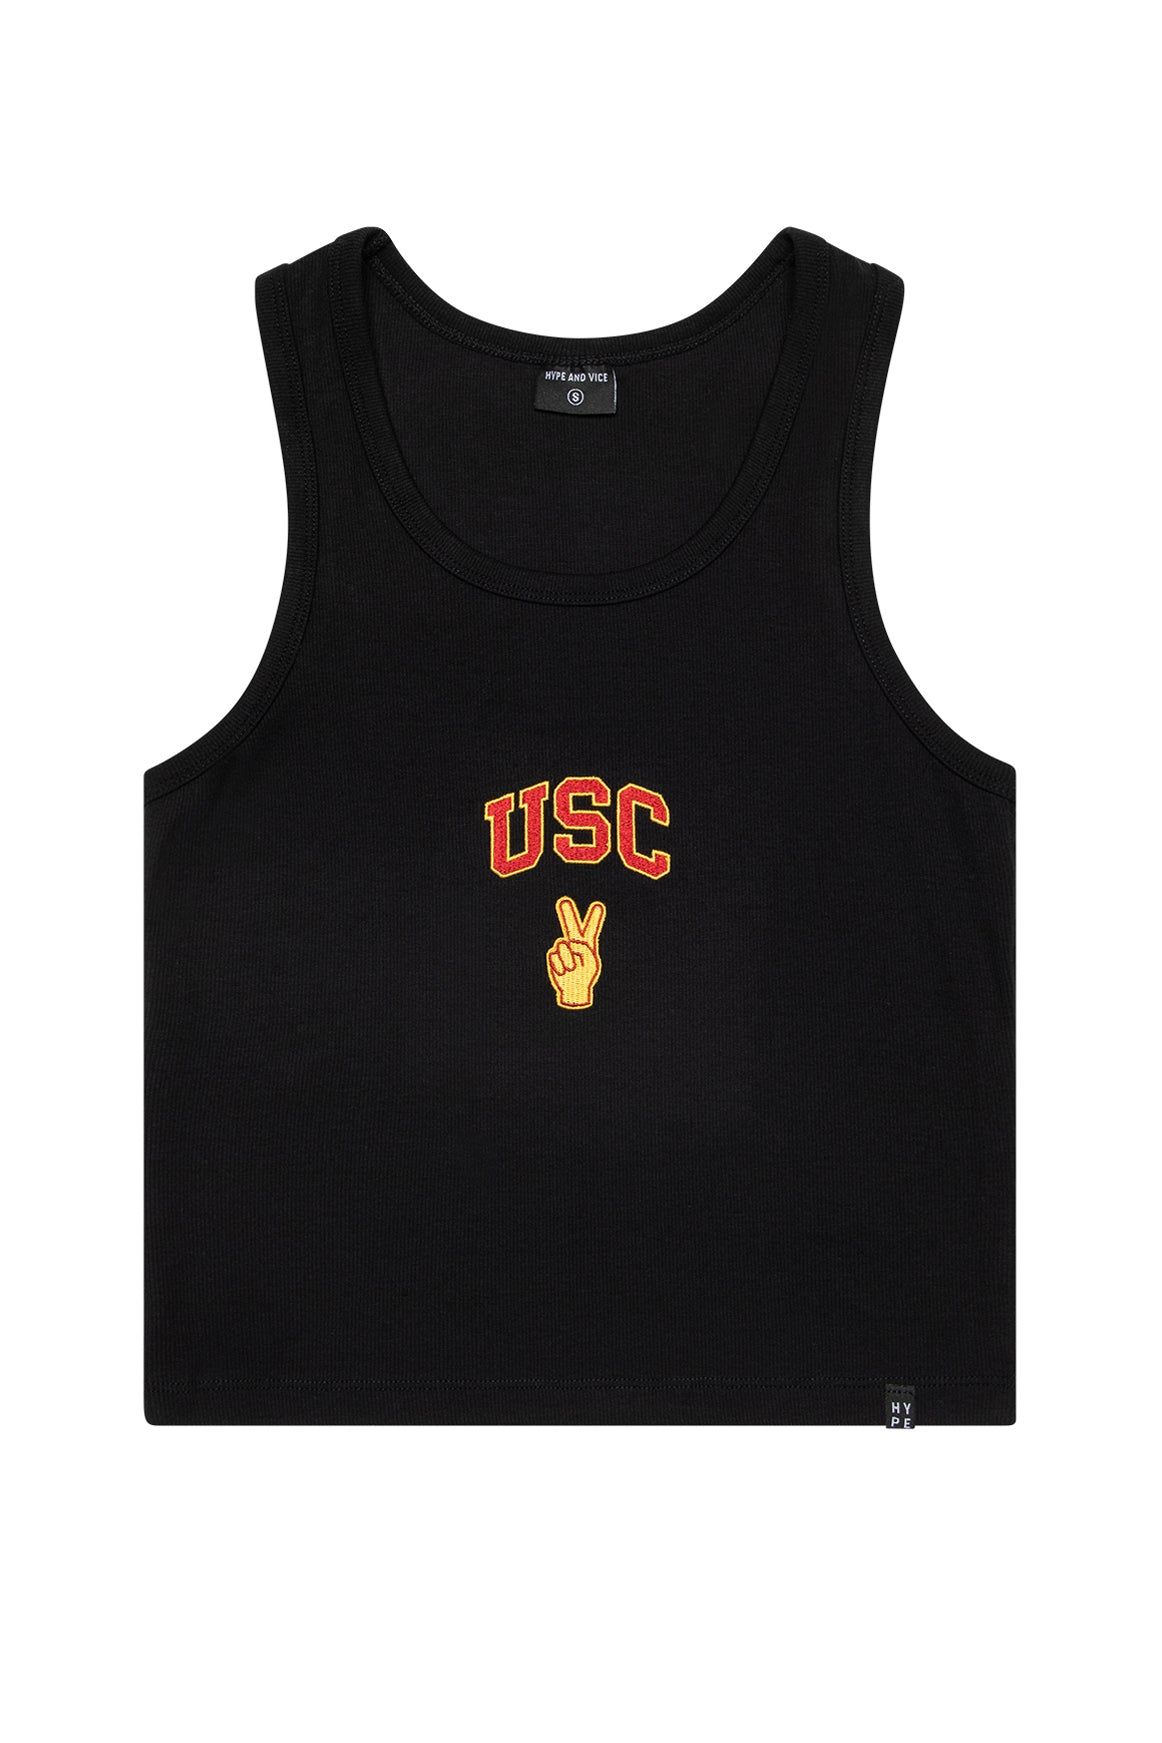 Univeristy of Southern California MVP Top